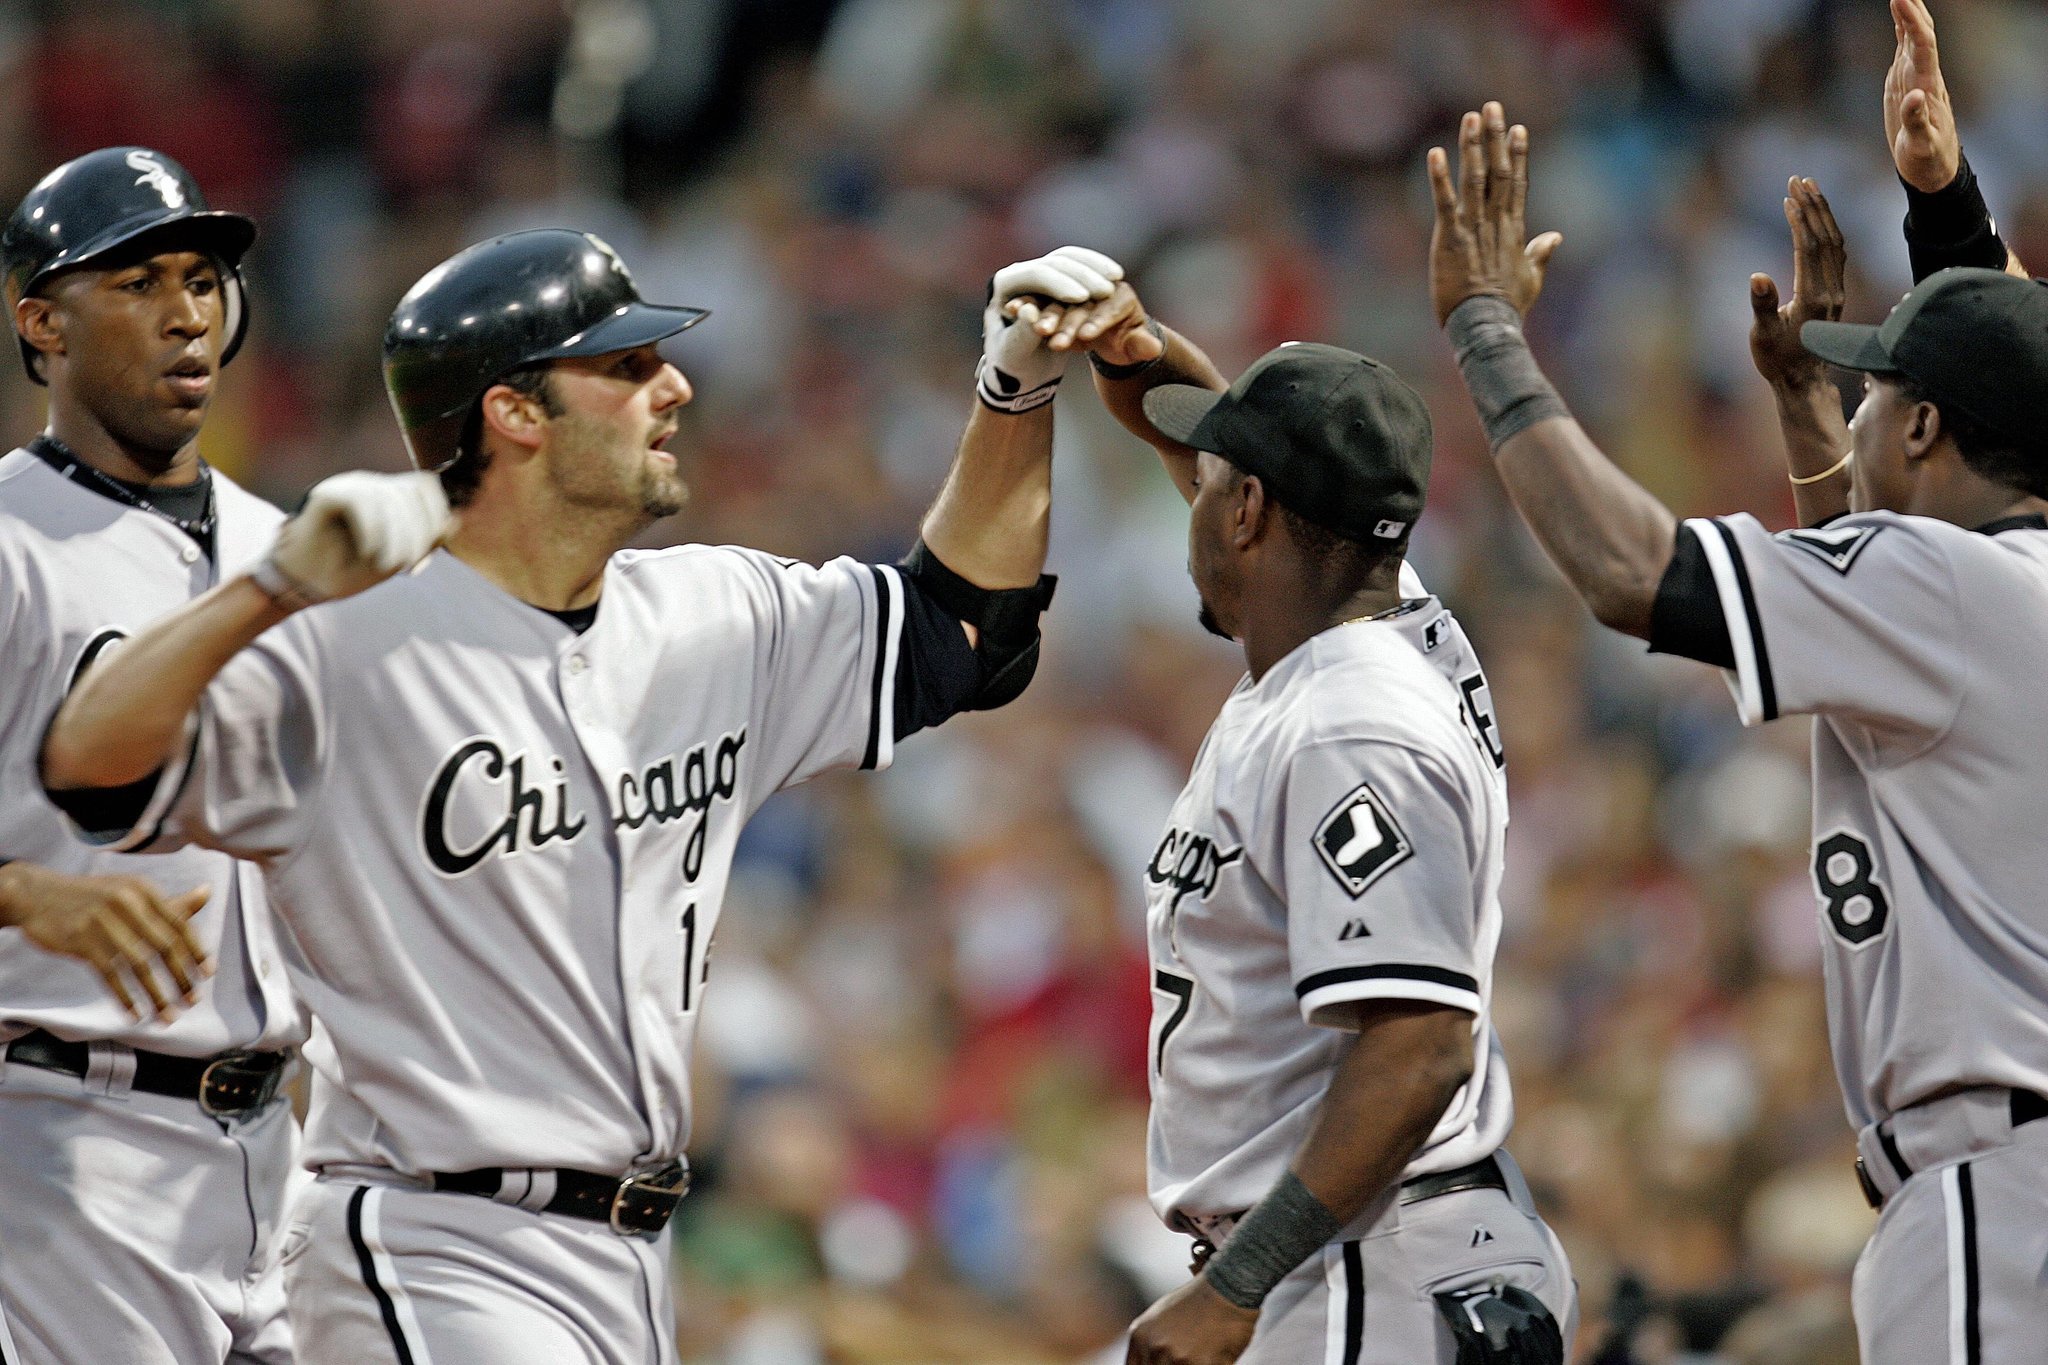 Chicago White Sox third baseman Joe Crede, left, tags out Los